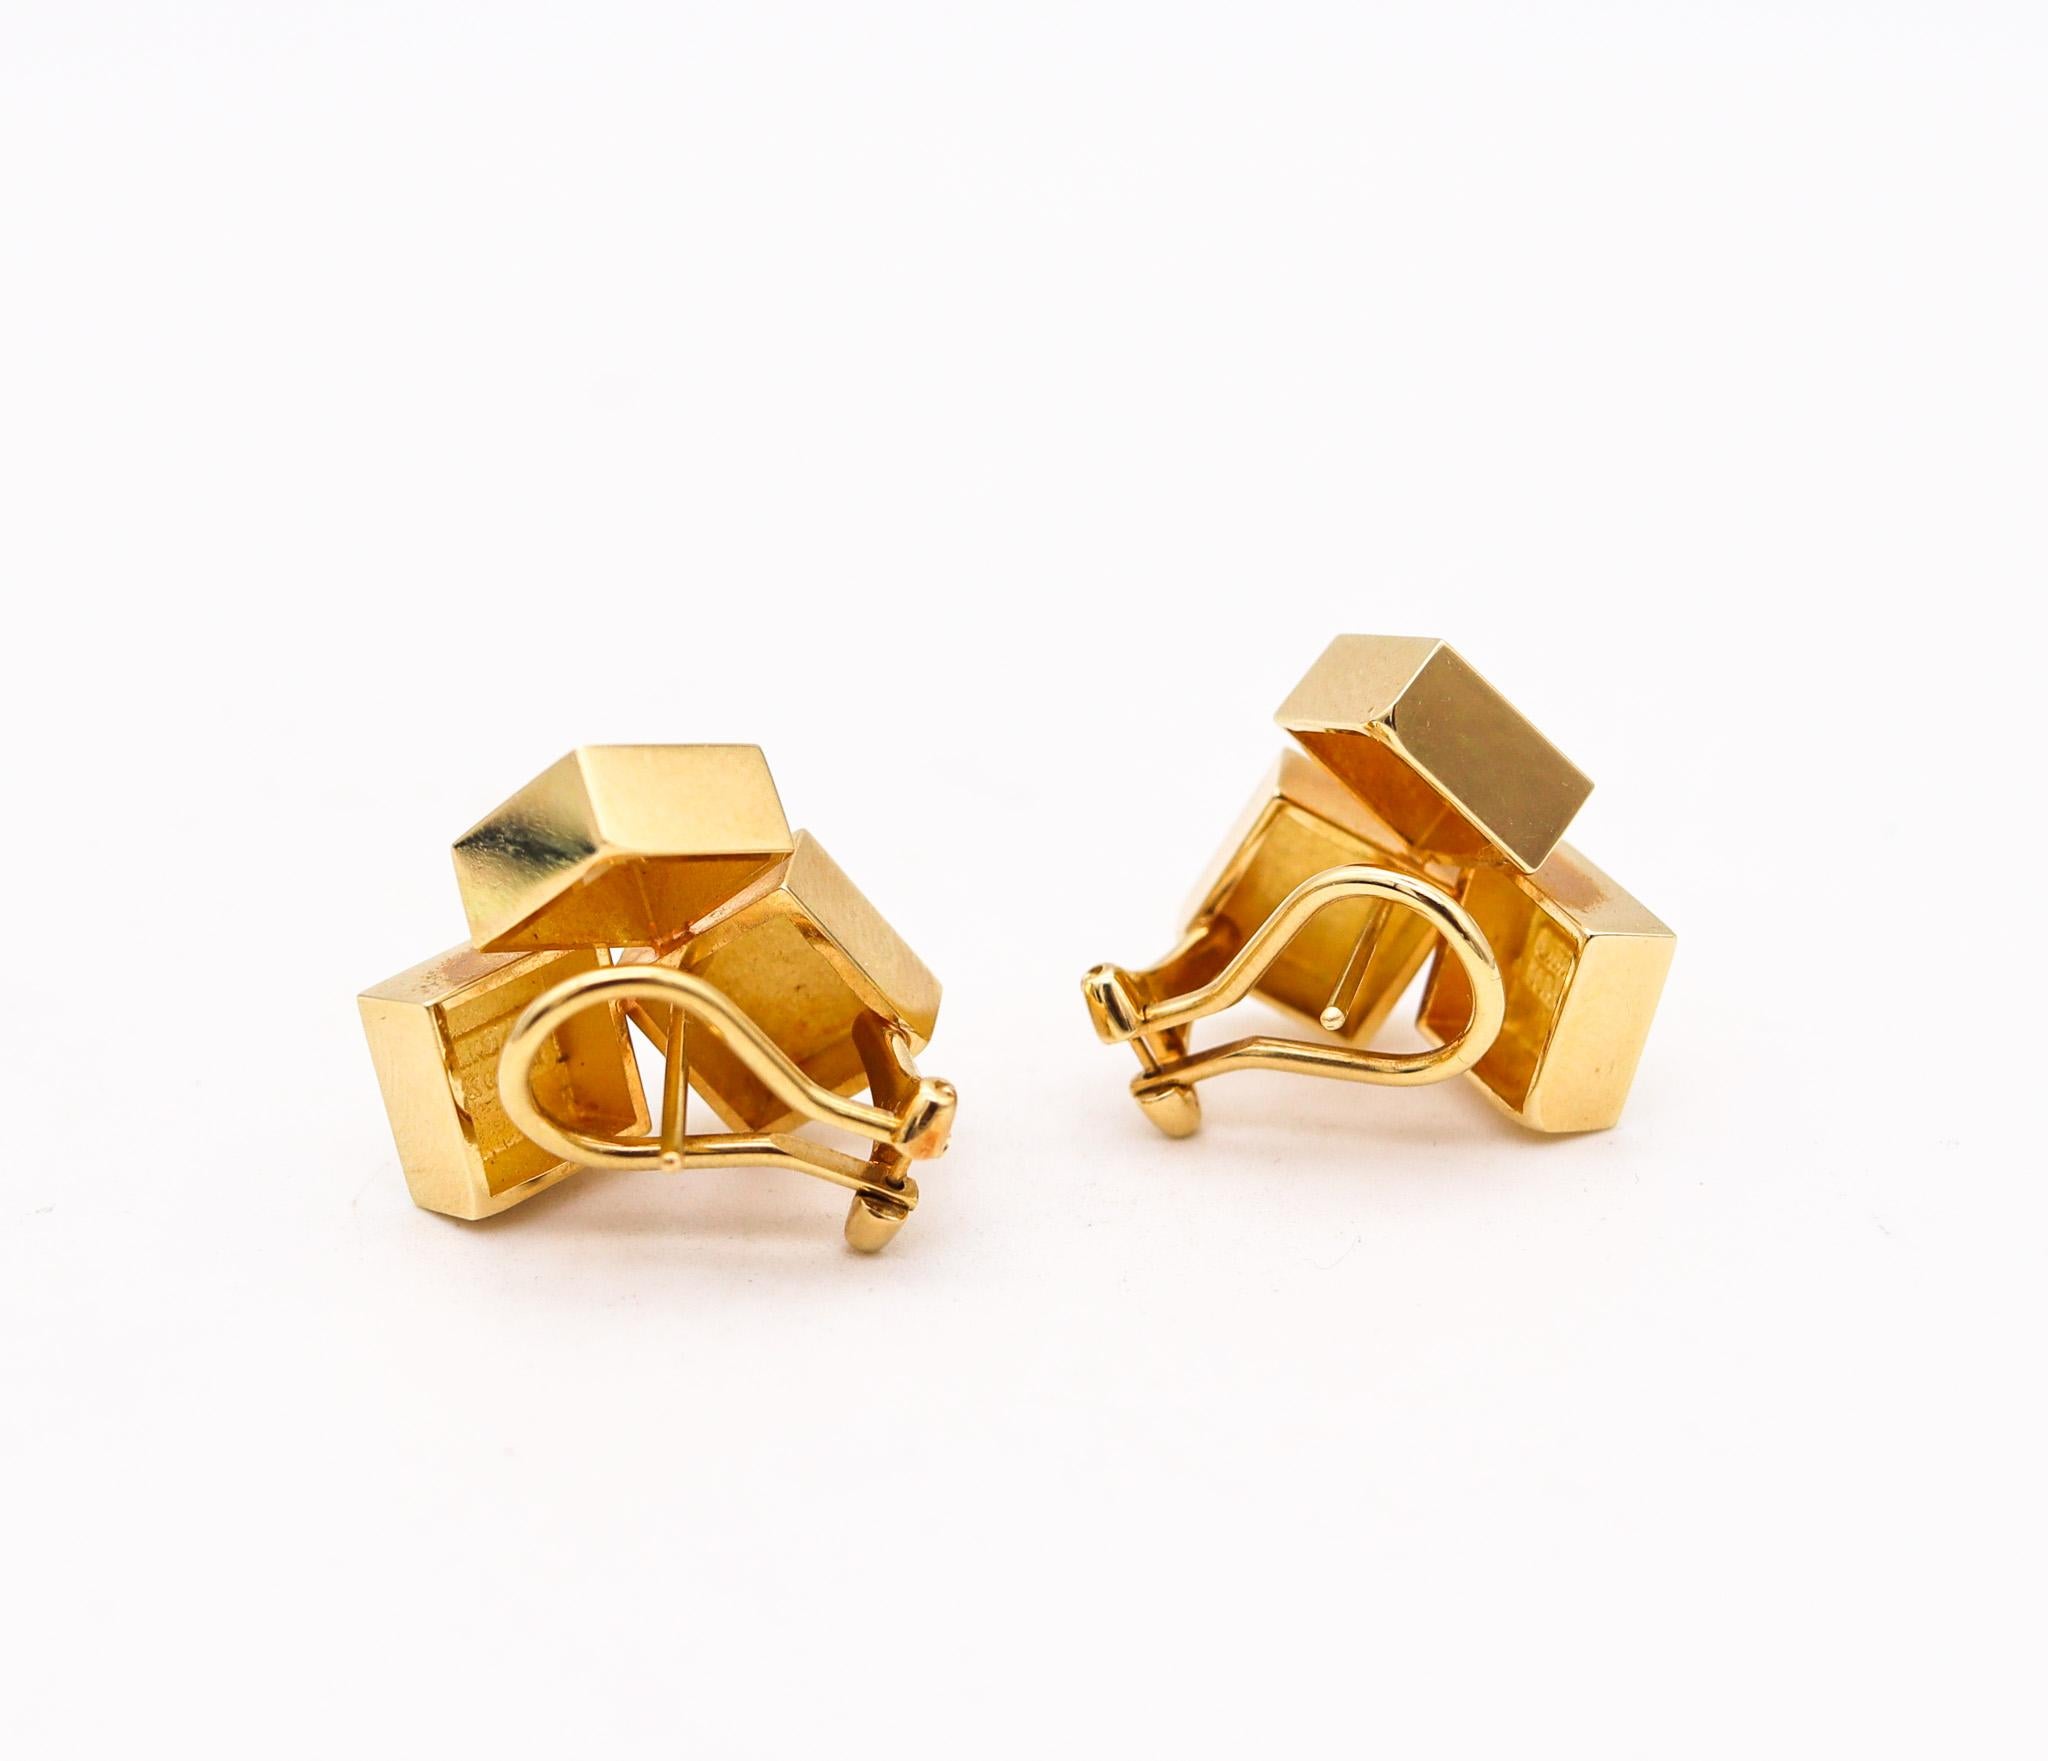 Modernist Antonio Cavelti 1970 For Birks Geometric Sculptural Earrings In 18Kt Yellow Gold For Sale